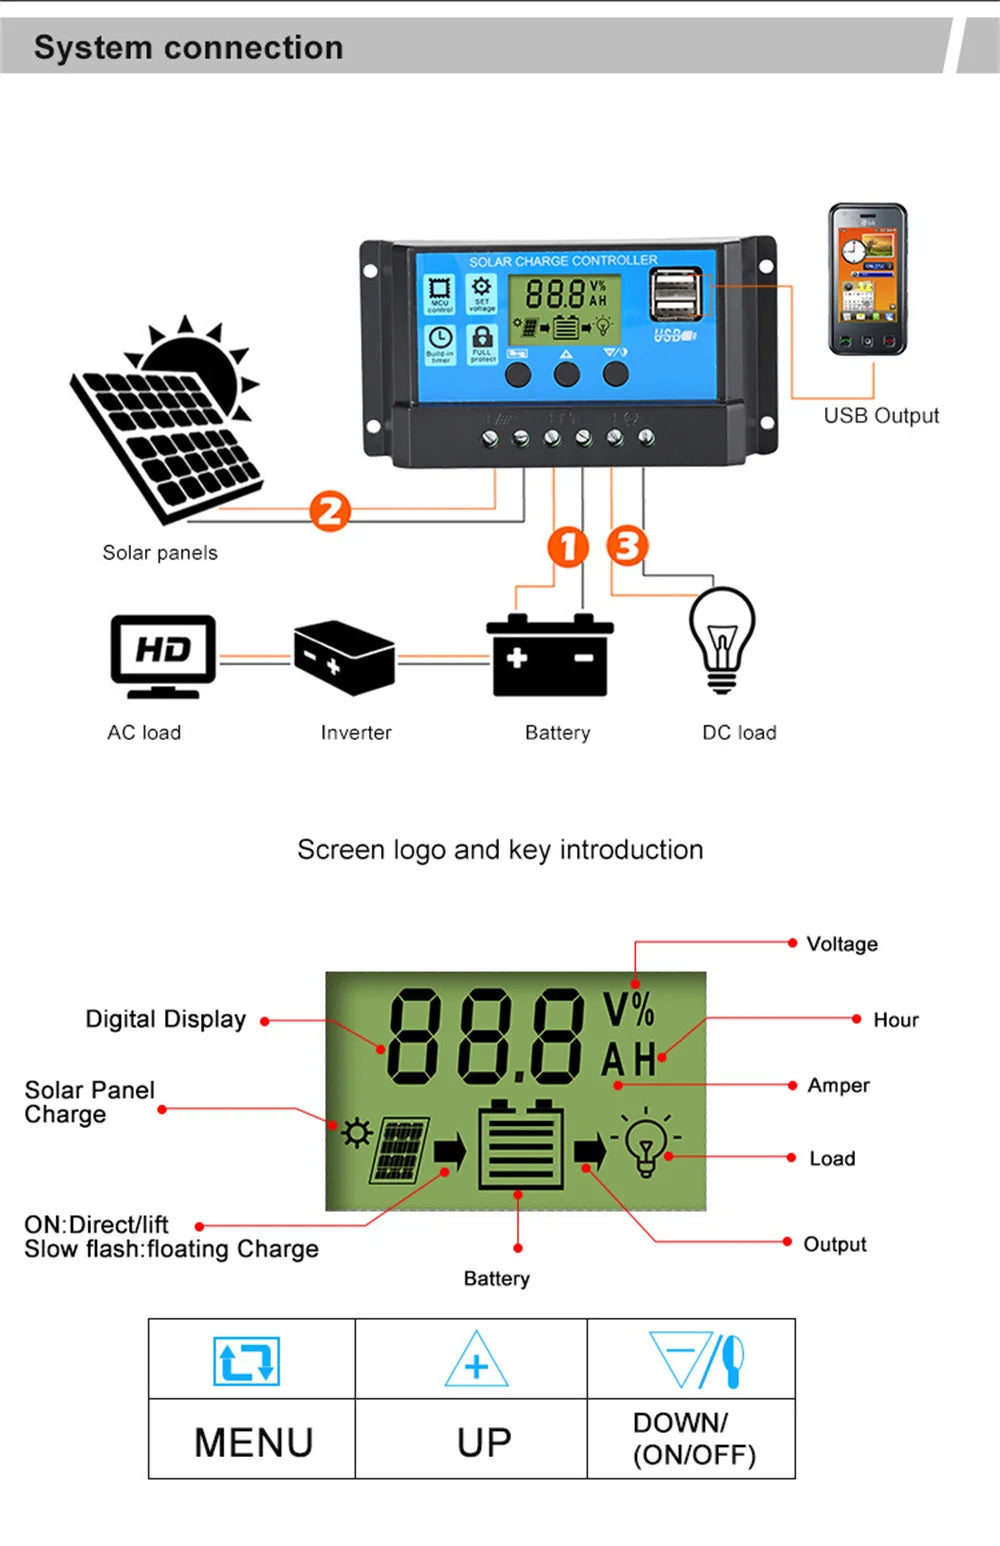 Upgraded Smart Solar Charge Controller, Smart solar charger with dual USB ports, LCD display, and adjustable current/voltage capabilities.